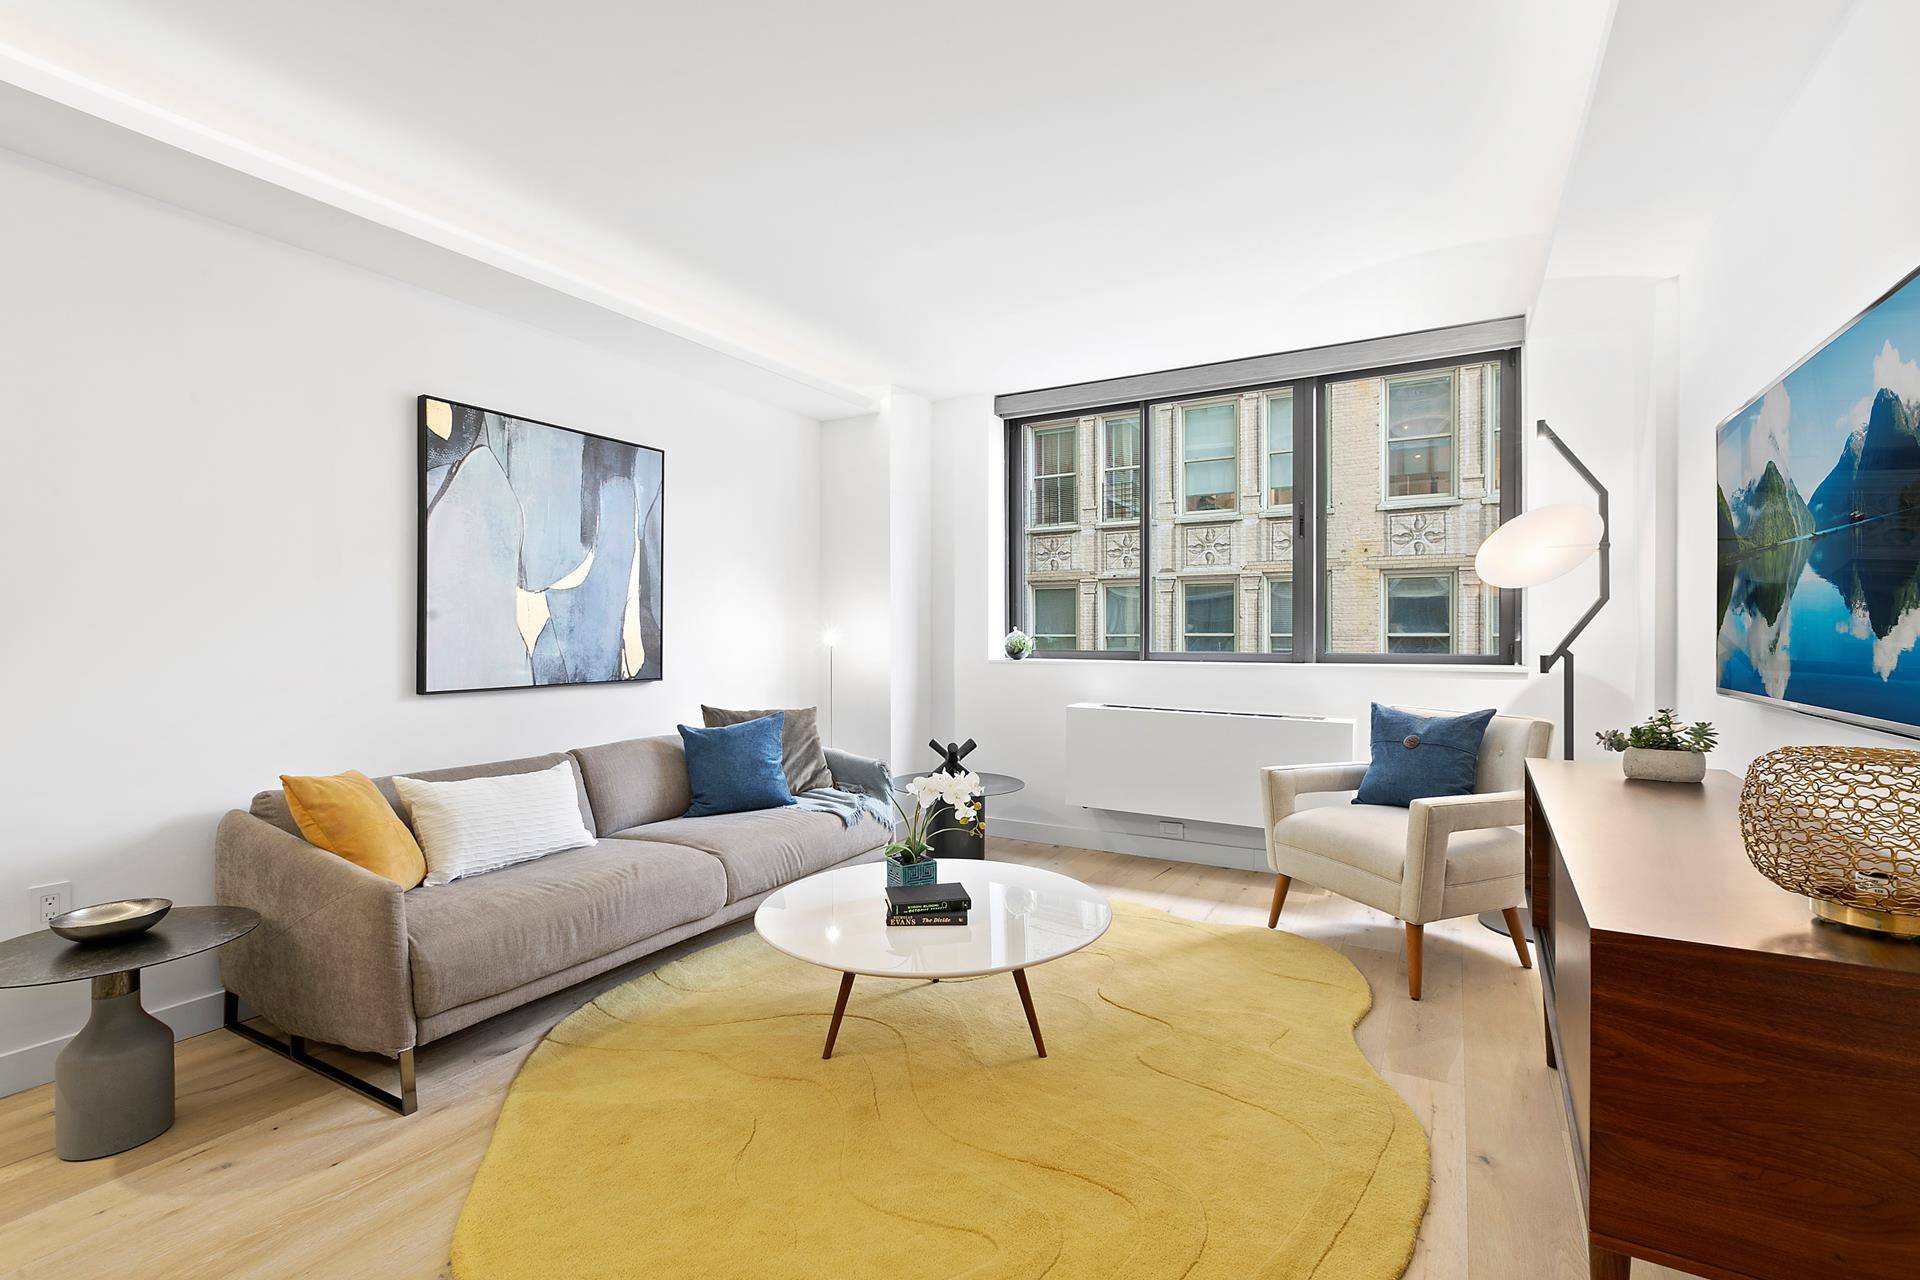 Located in the heart of the Flatiron District, on what is one of the best blocks in Manhattan, this exceptionally bright south facing one bedroom condominium is in mint condition ...